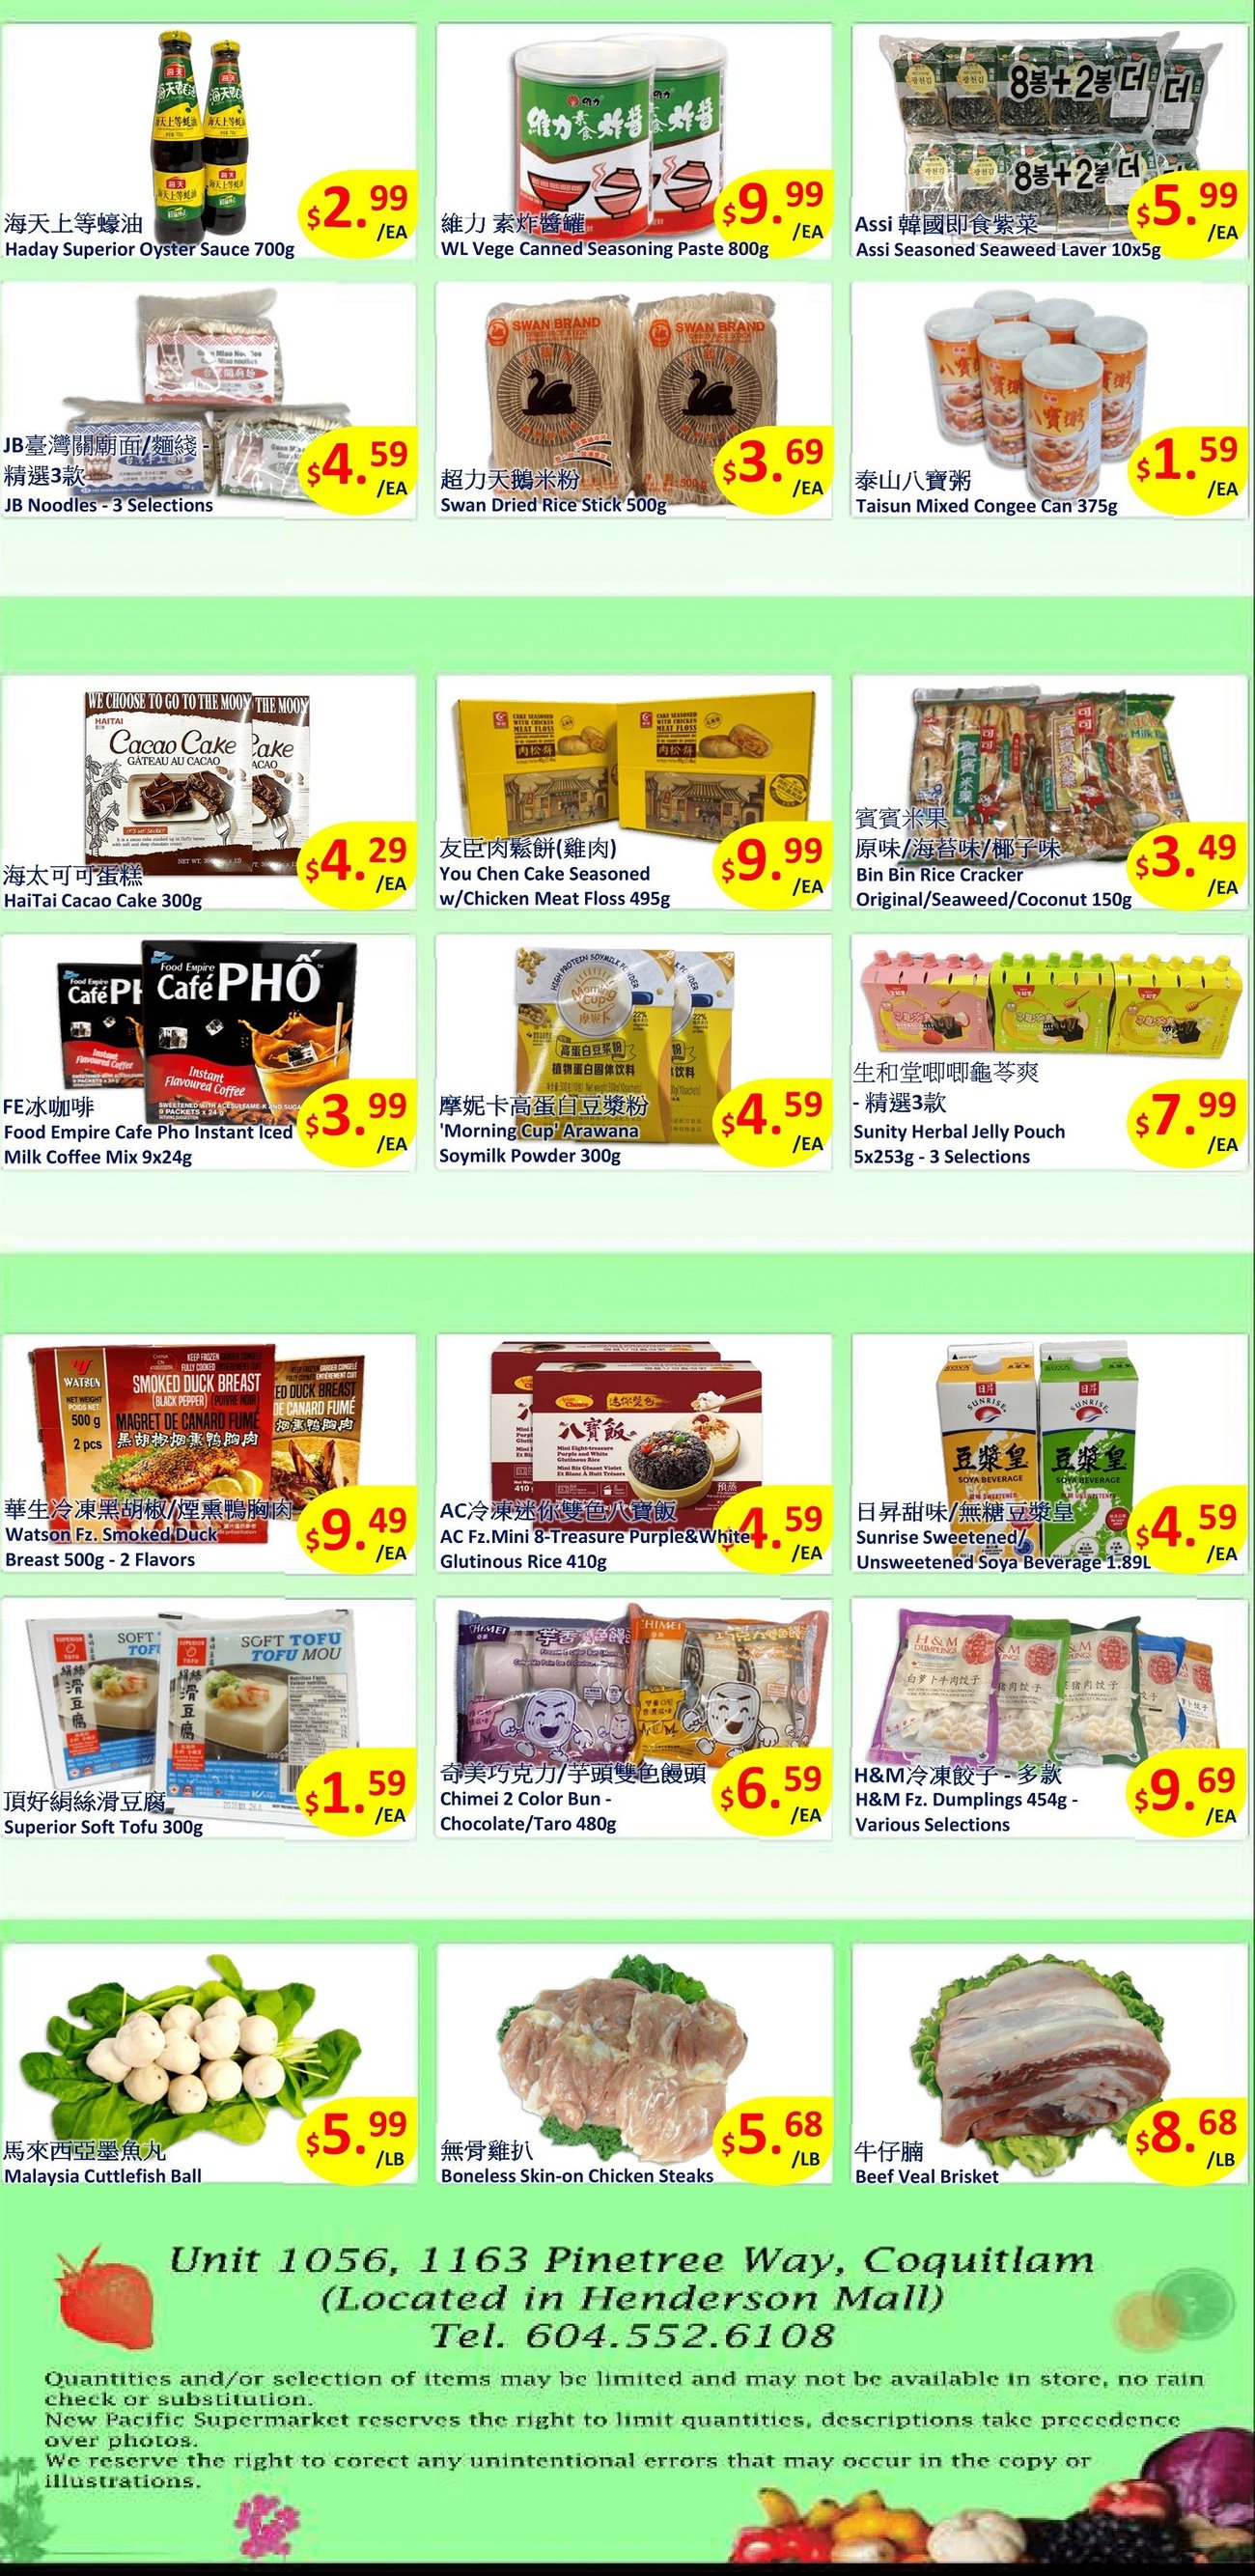 New Pacific Supermarket - Weekly Flyer Specials - Page 2